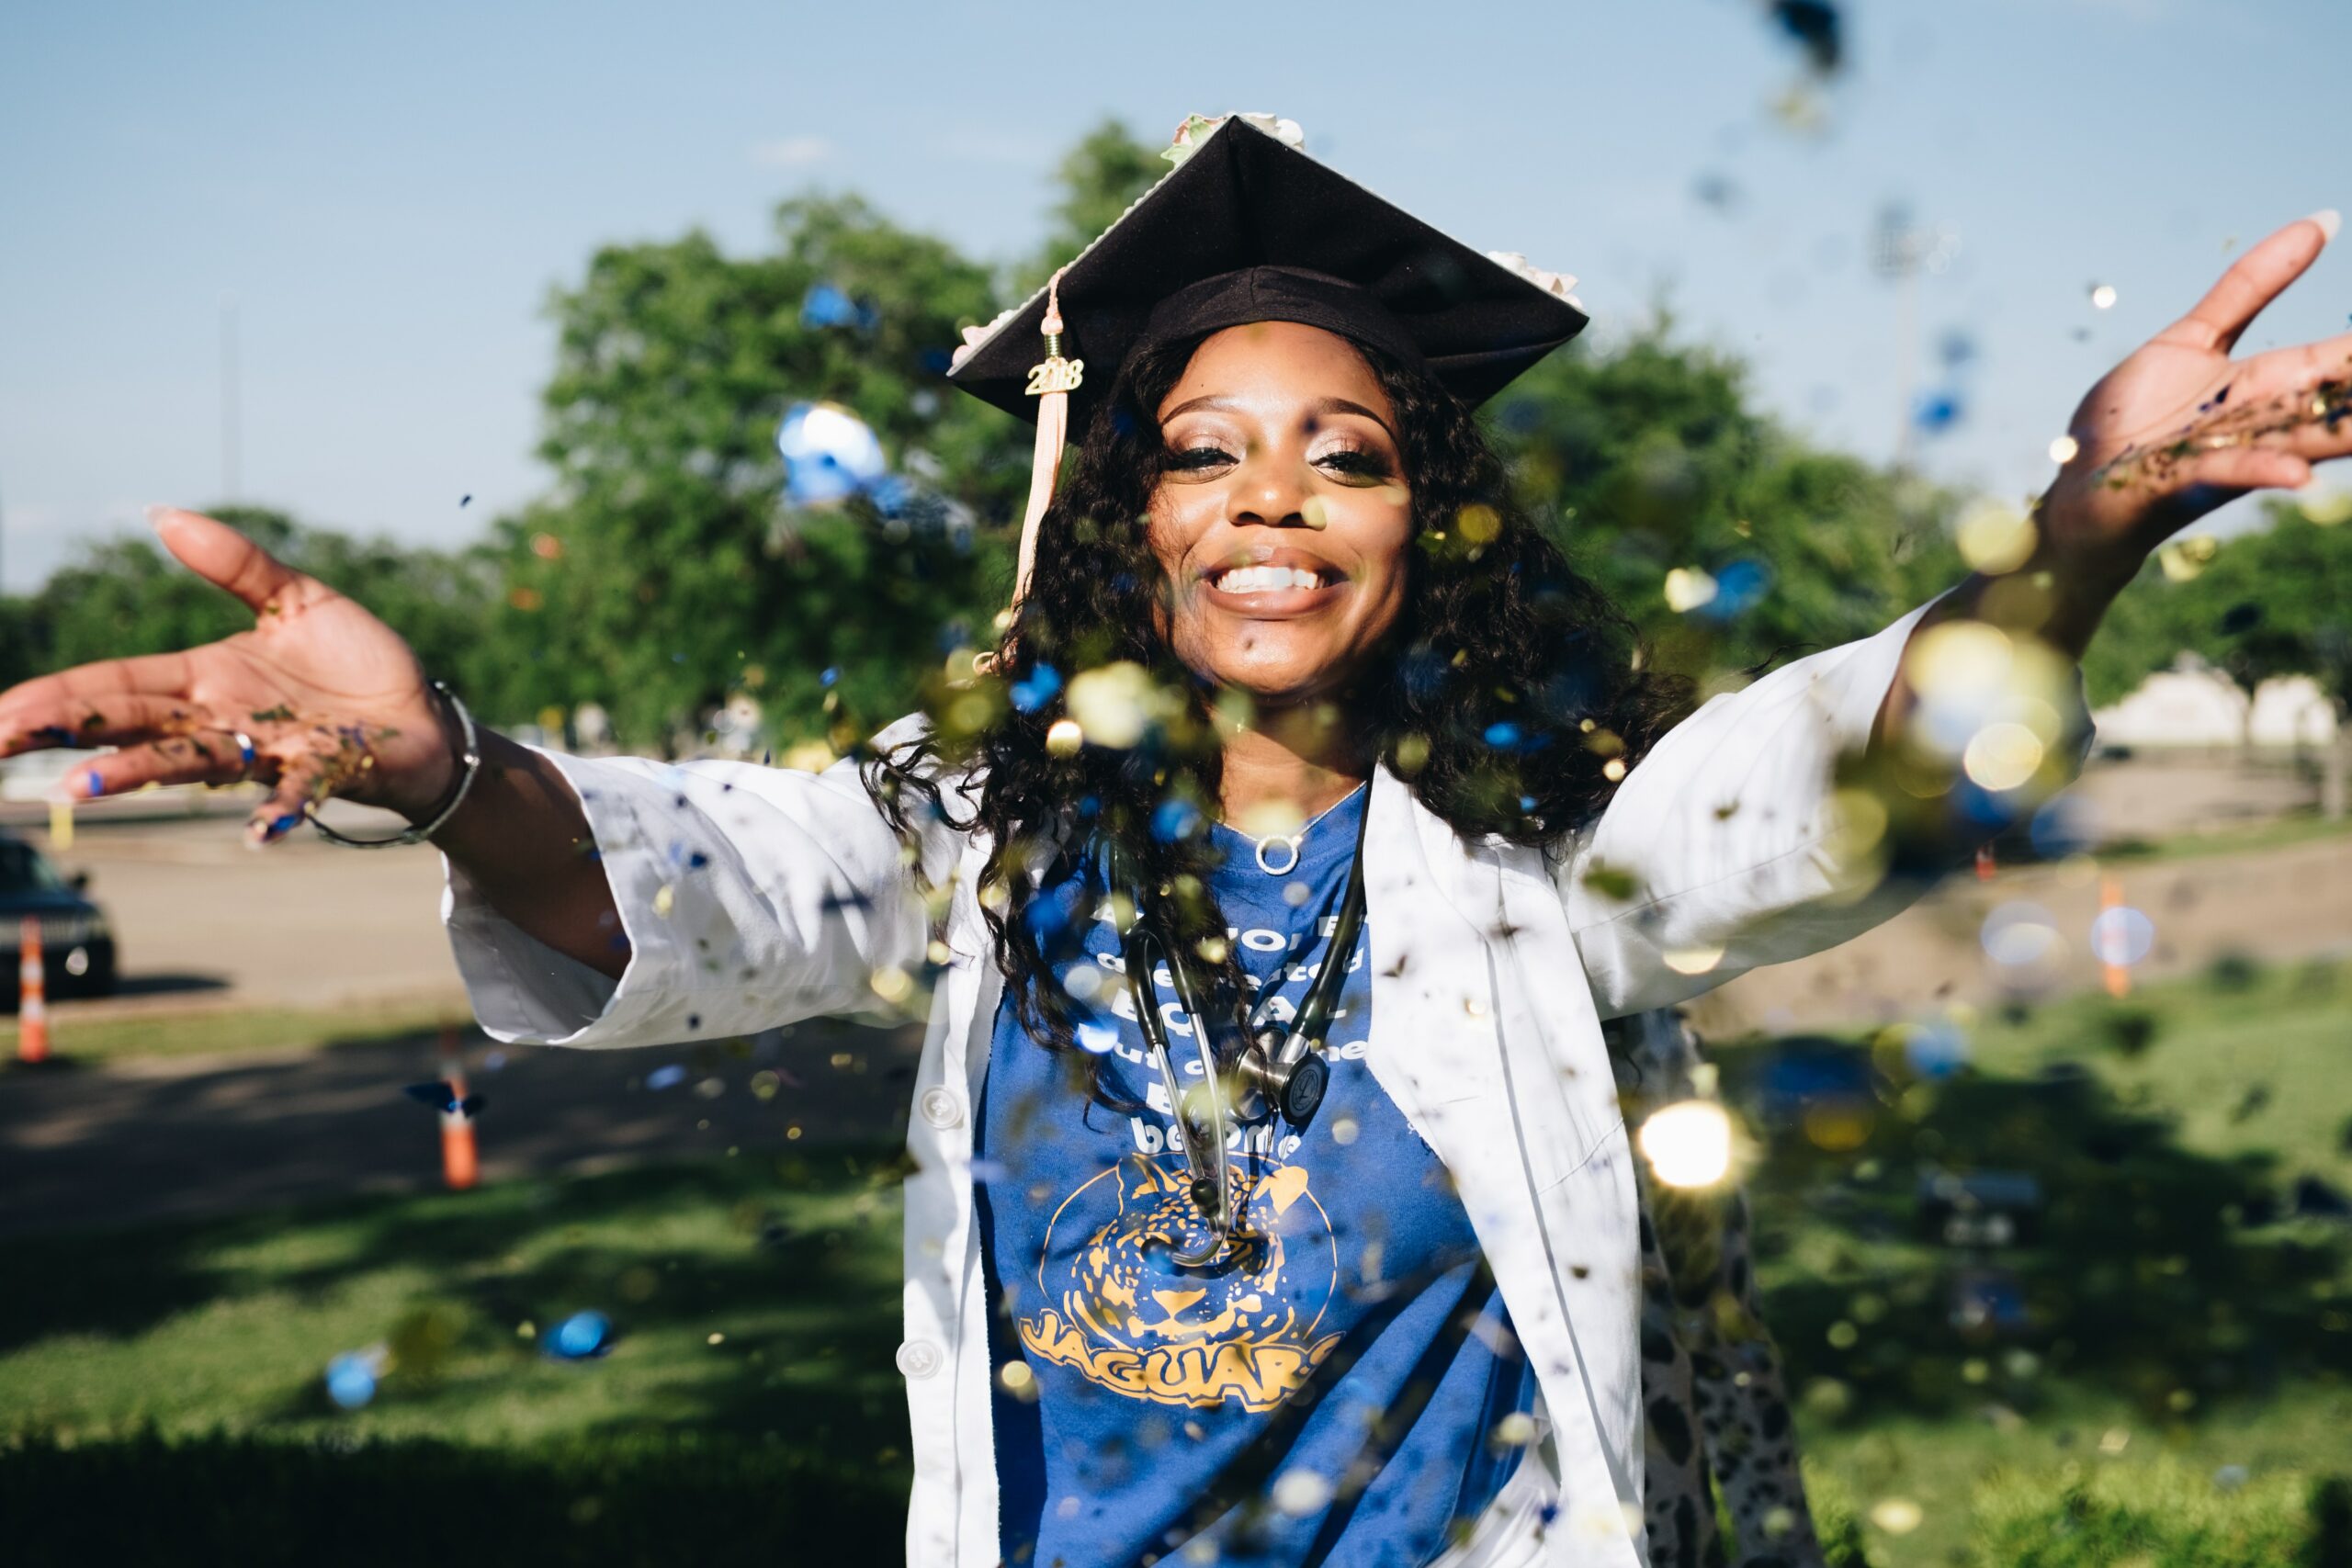 The best and most practical graduation gifts that they’ll really use